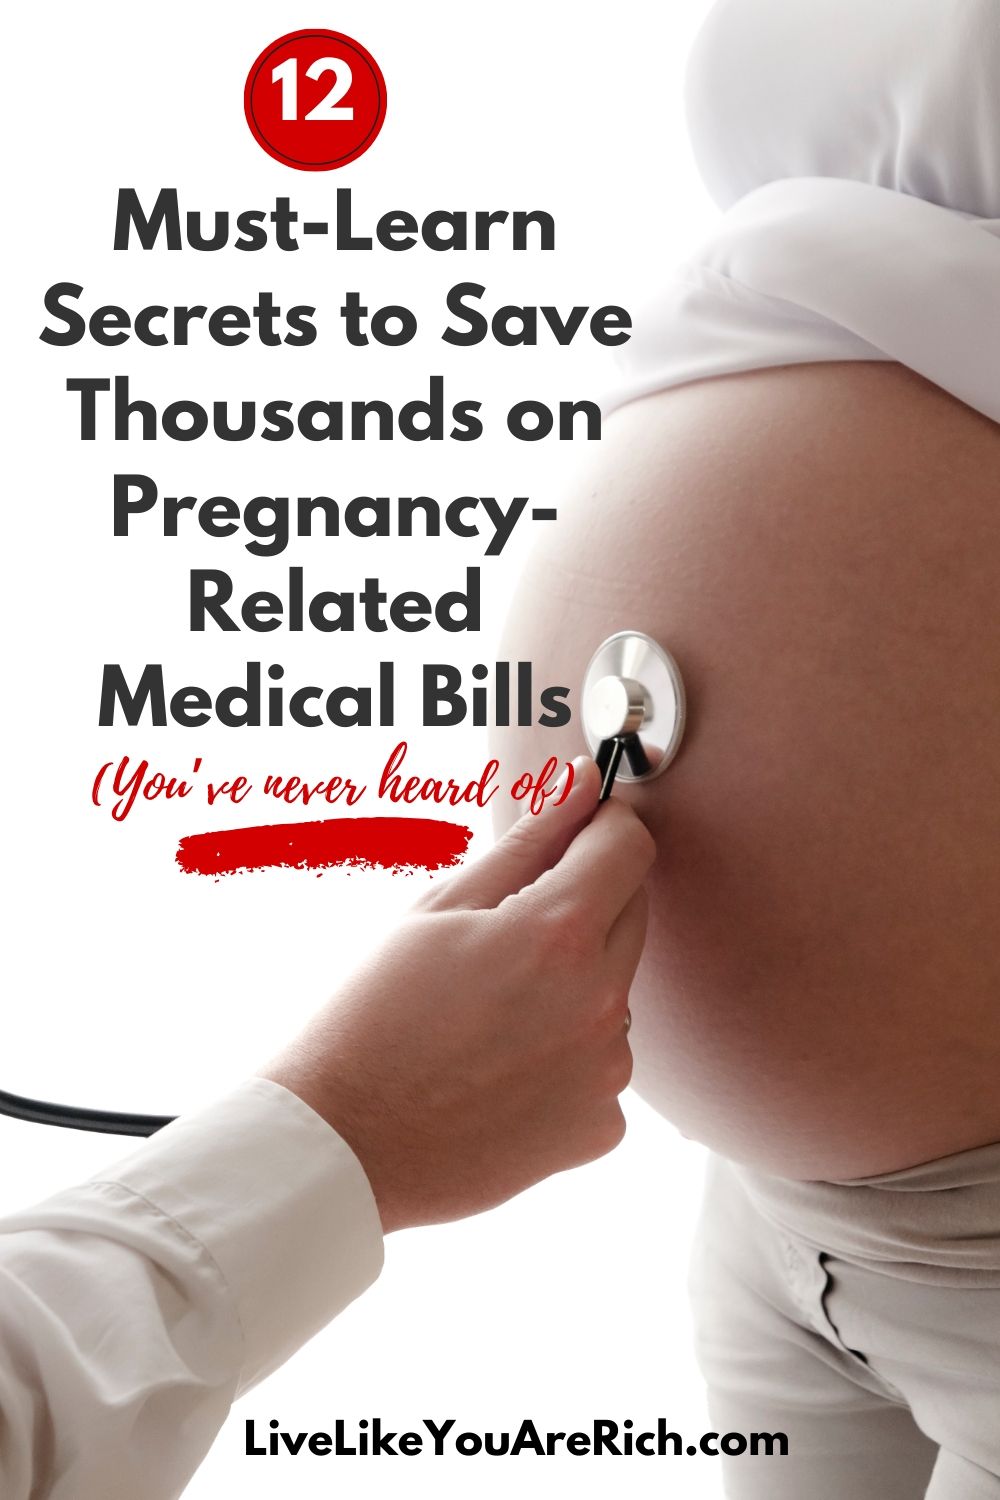 There are some awesome ways to save money on medical bills during pregnancy, labor, and postpartum. Some I found after searching for hours online and talking to insurance representatives for my first pregnancy. And a few I didn’t find until my second pregnancy and really wished I had known about them for my first!